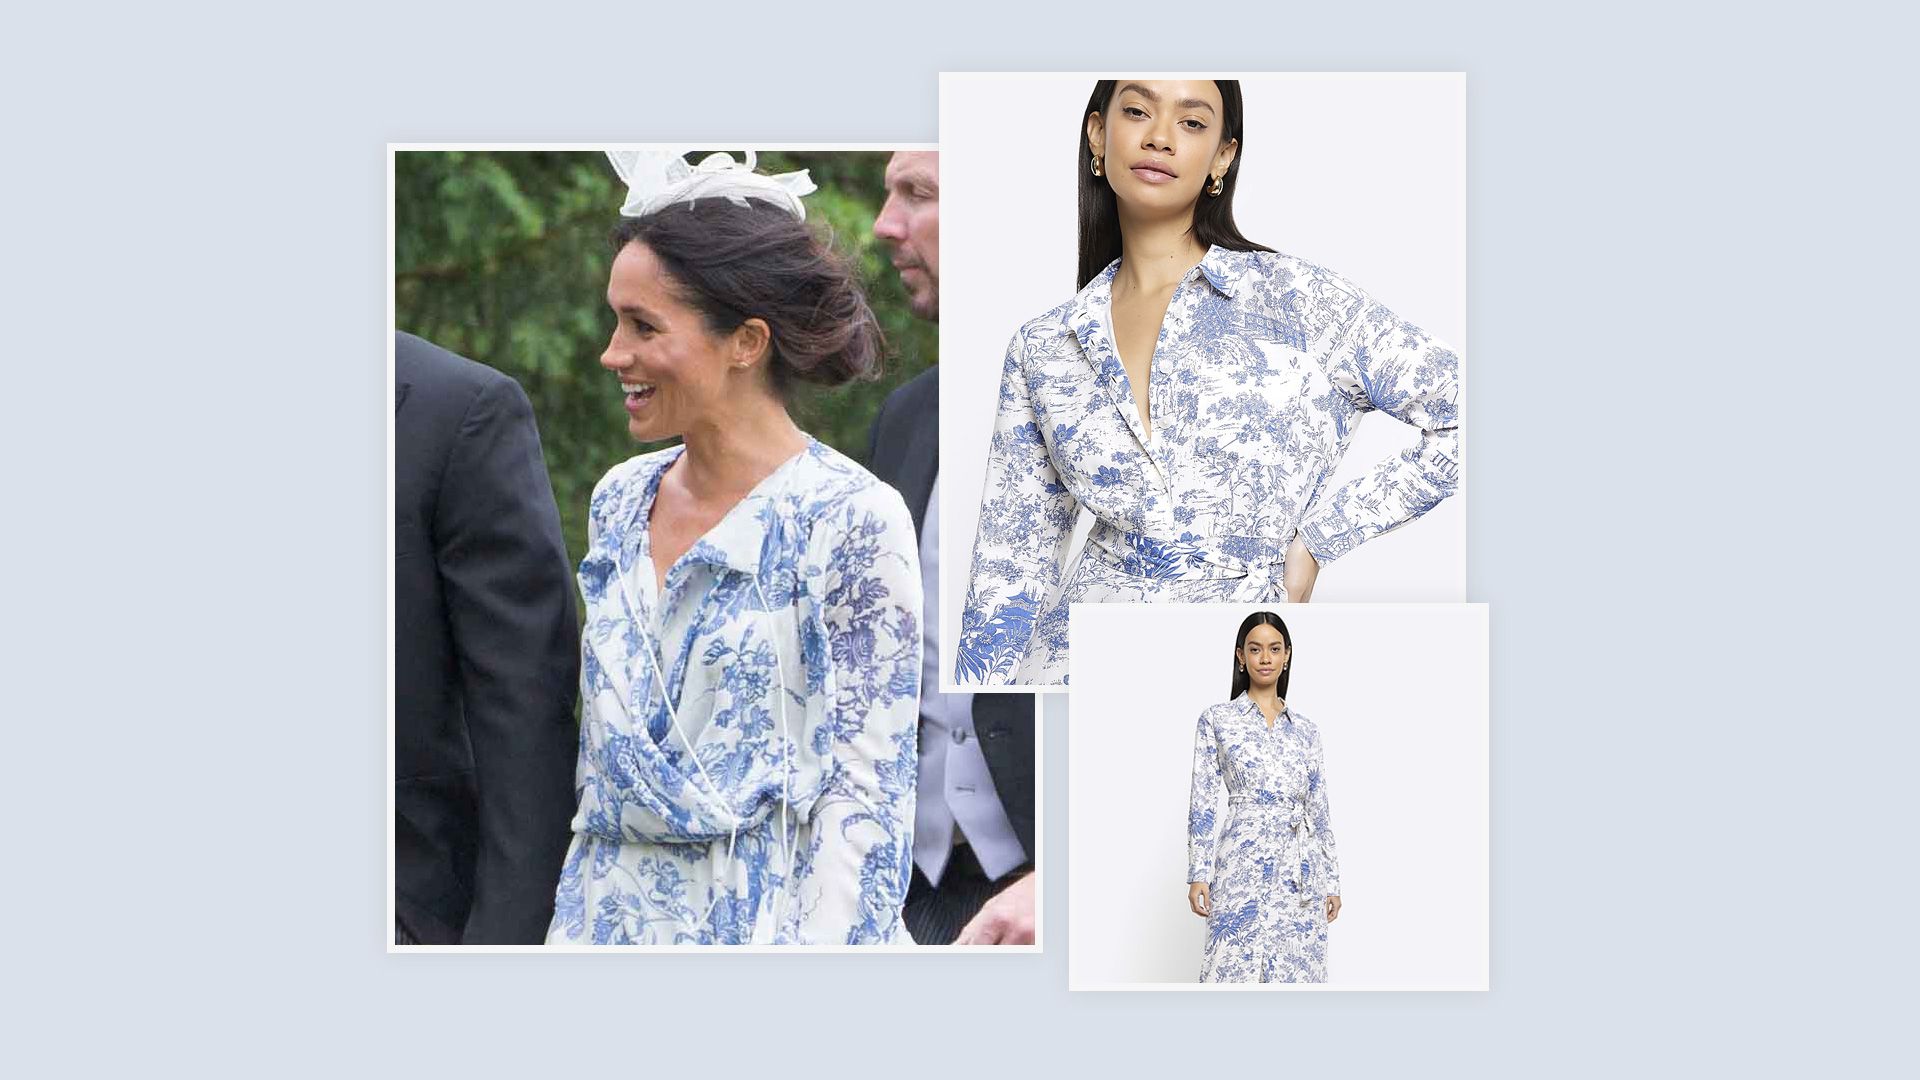 I manifested a lookalike of Meghan Markle’s wedding guest dress & the one I found is a steal